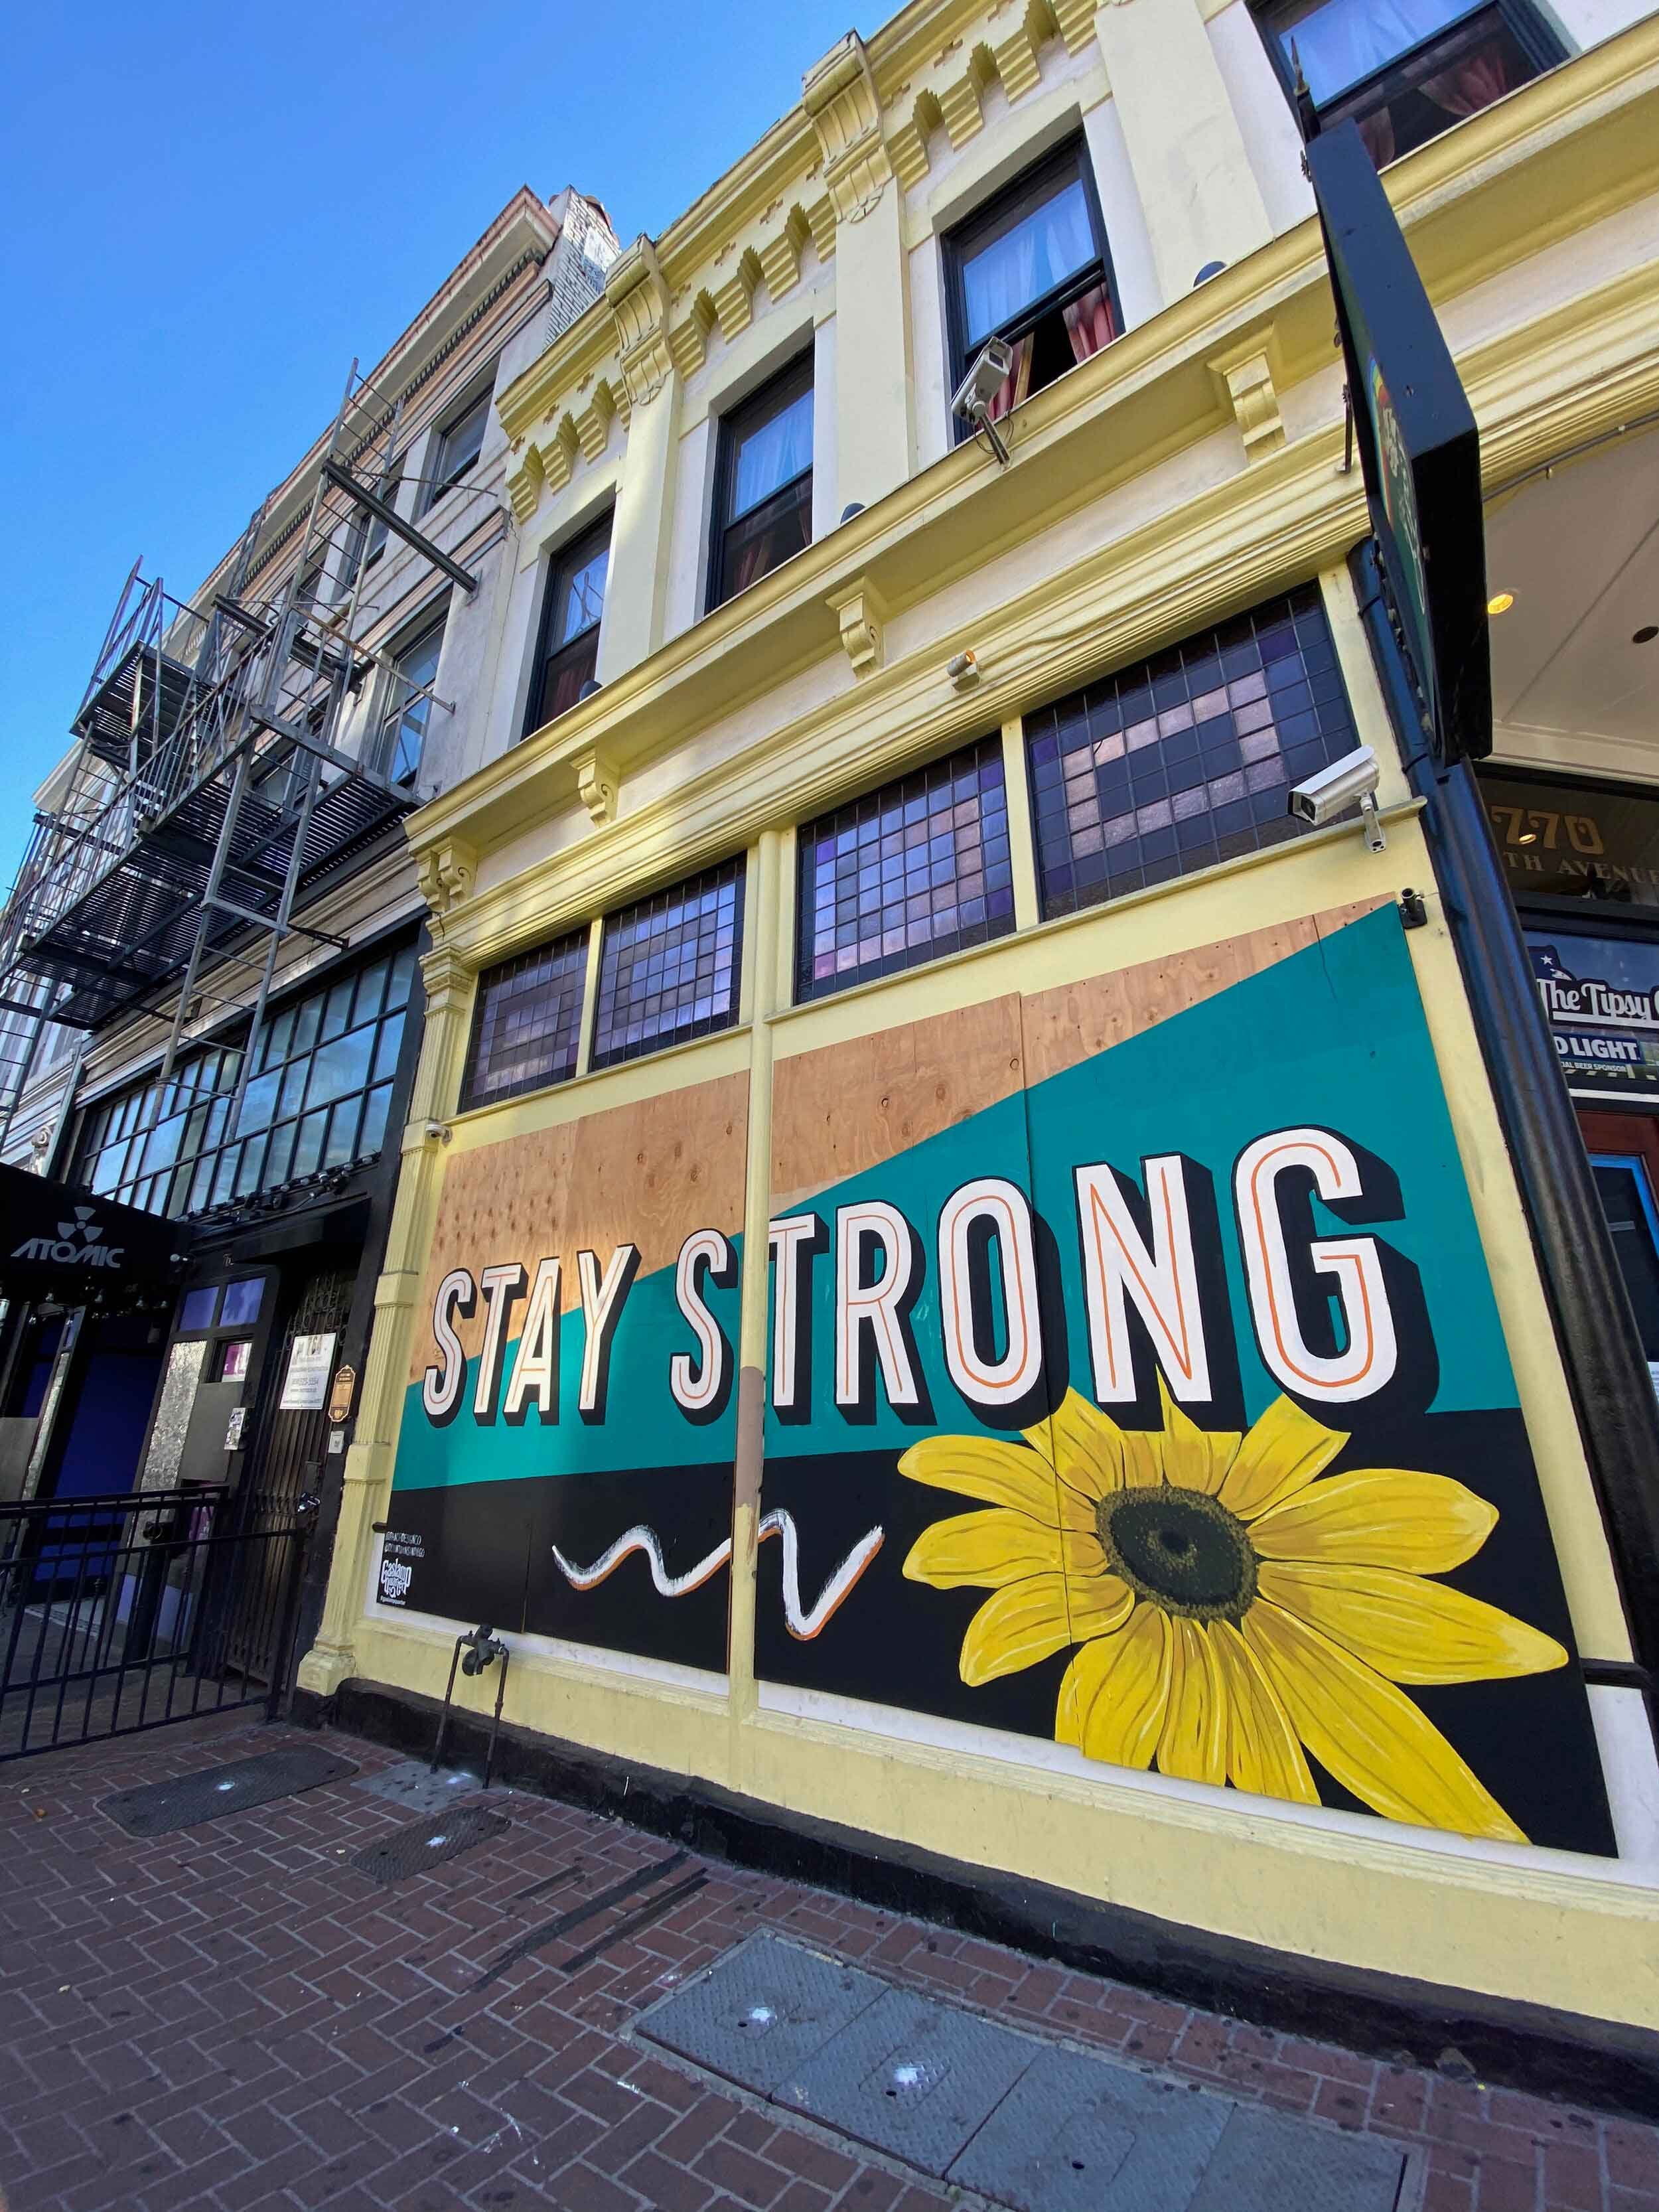 Stay Strong San Diego Mural.jpg